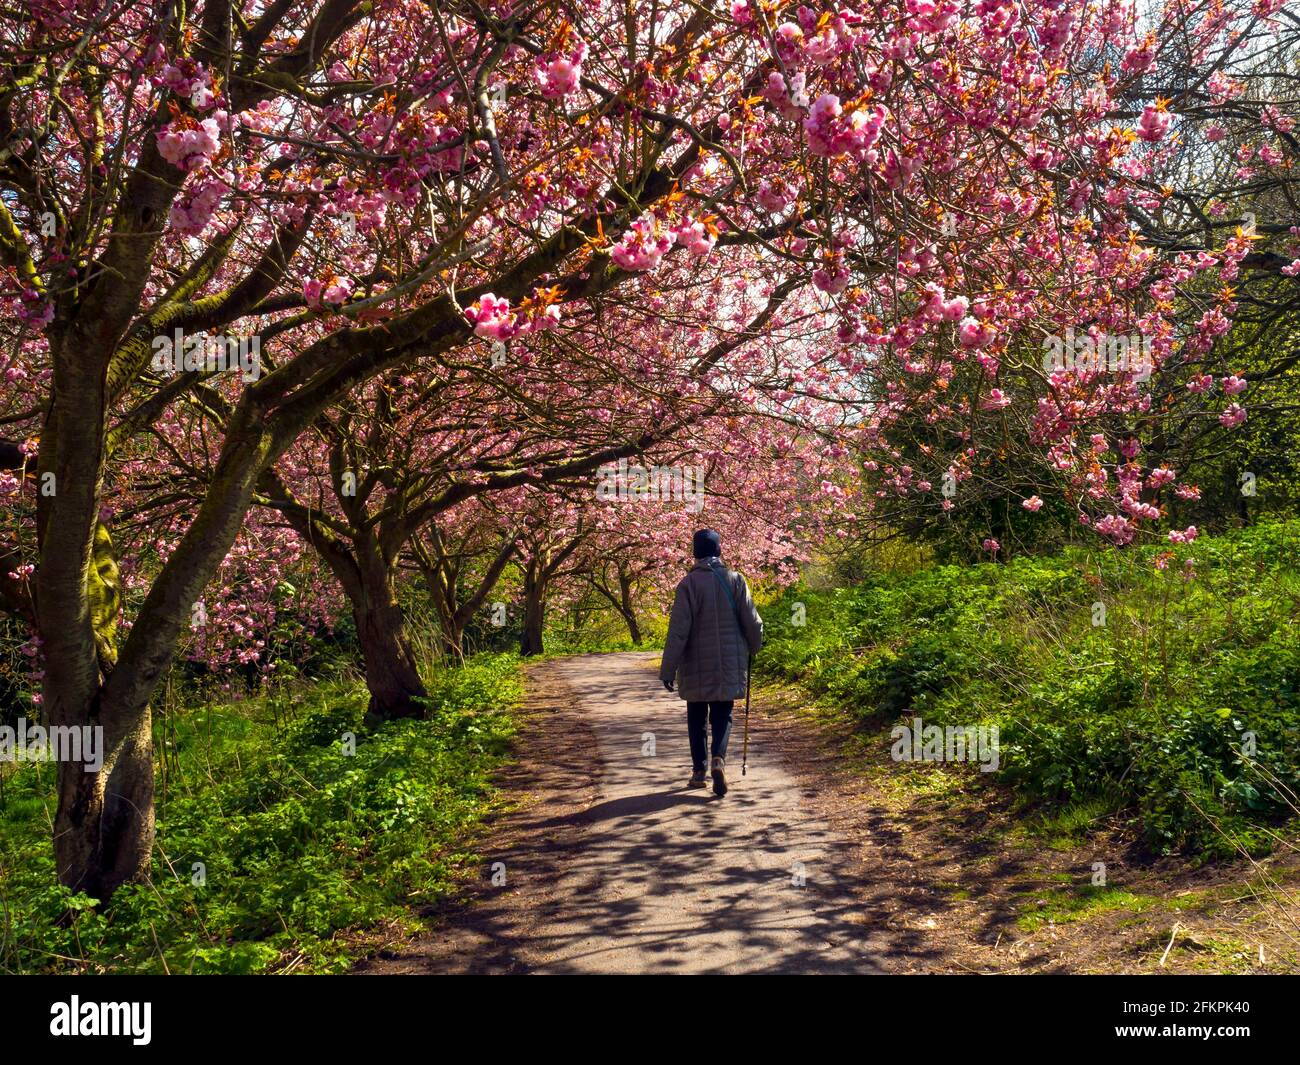 School girls walking through a park in Tokyo under early spring cherry  blossoms Stock Photo - Alamy